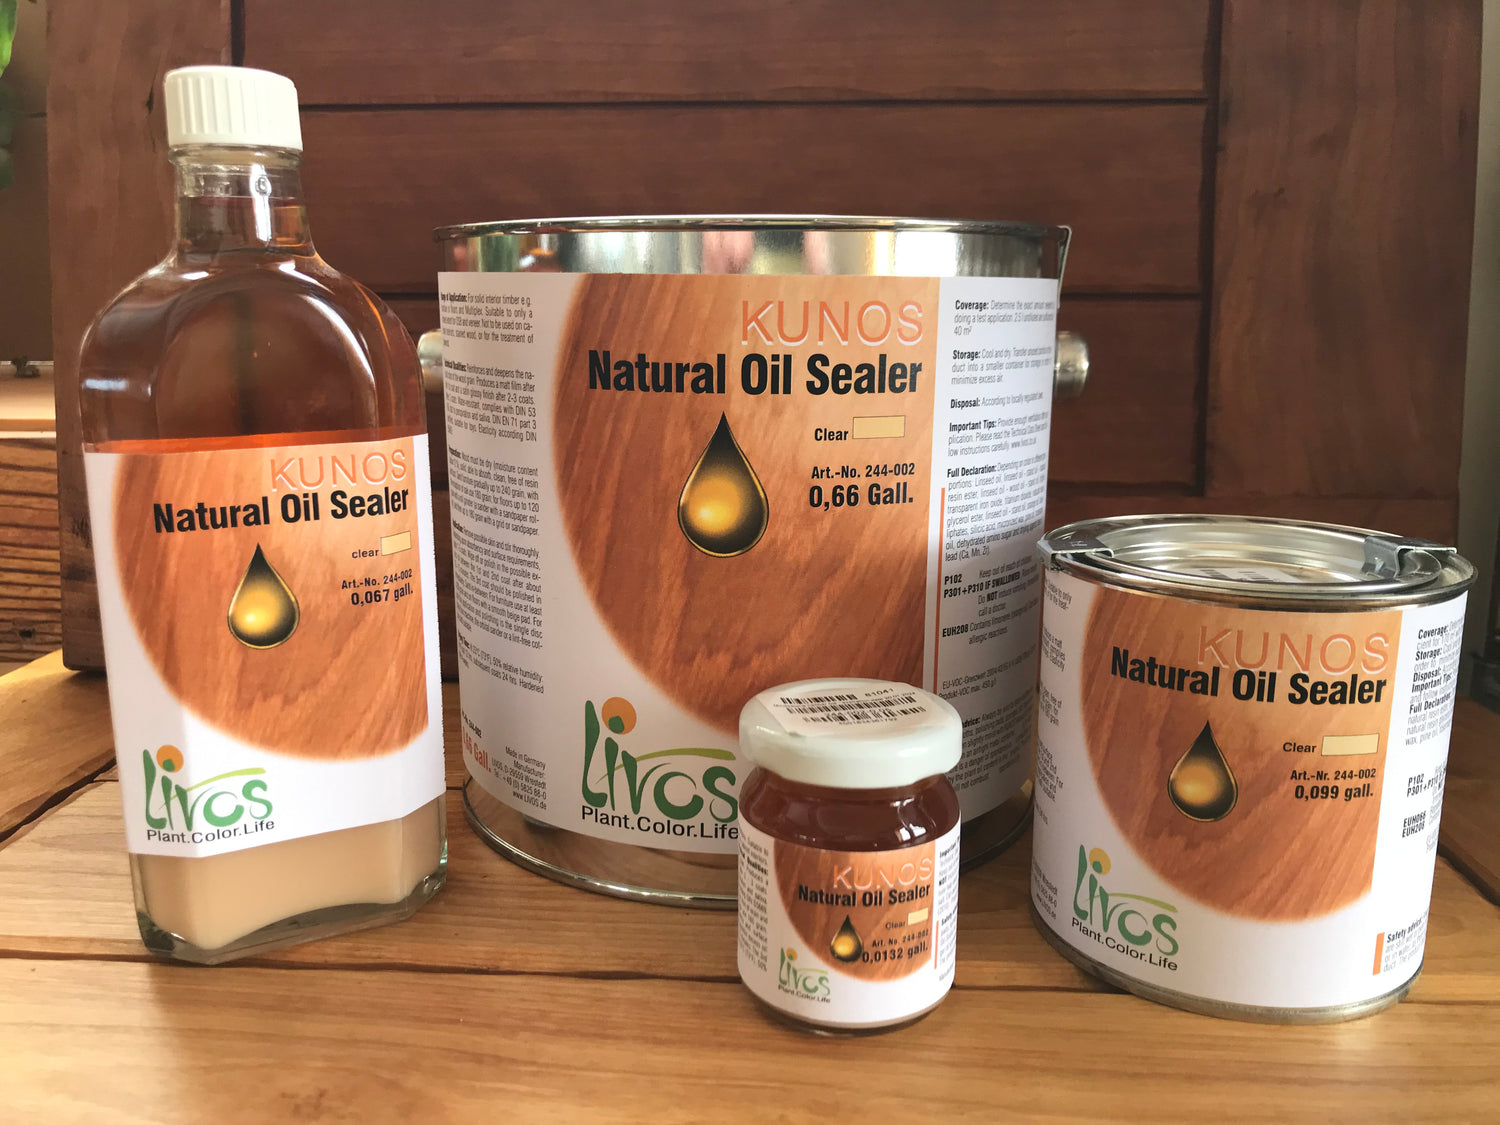 Kunos natural oil sealer in different sizes